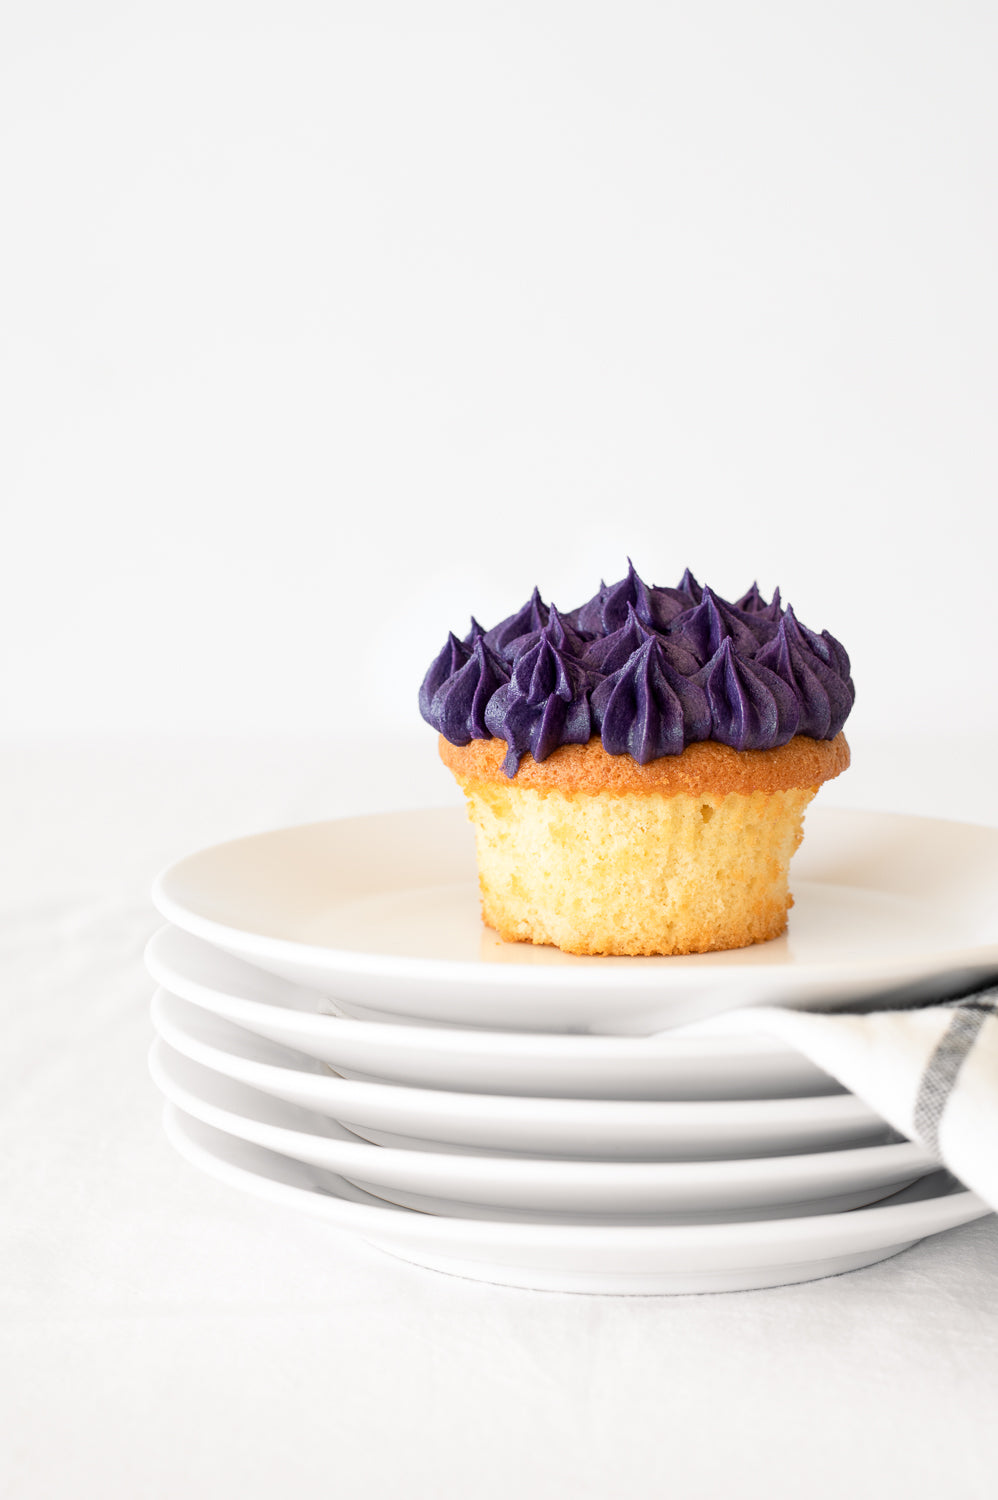 A stack of plates holding a vanilla cupcake with purple piped icing